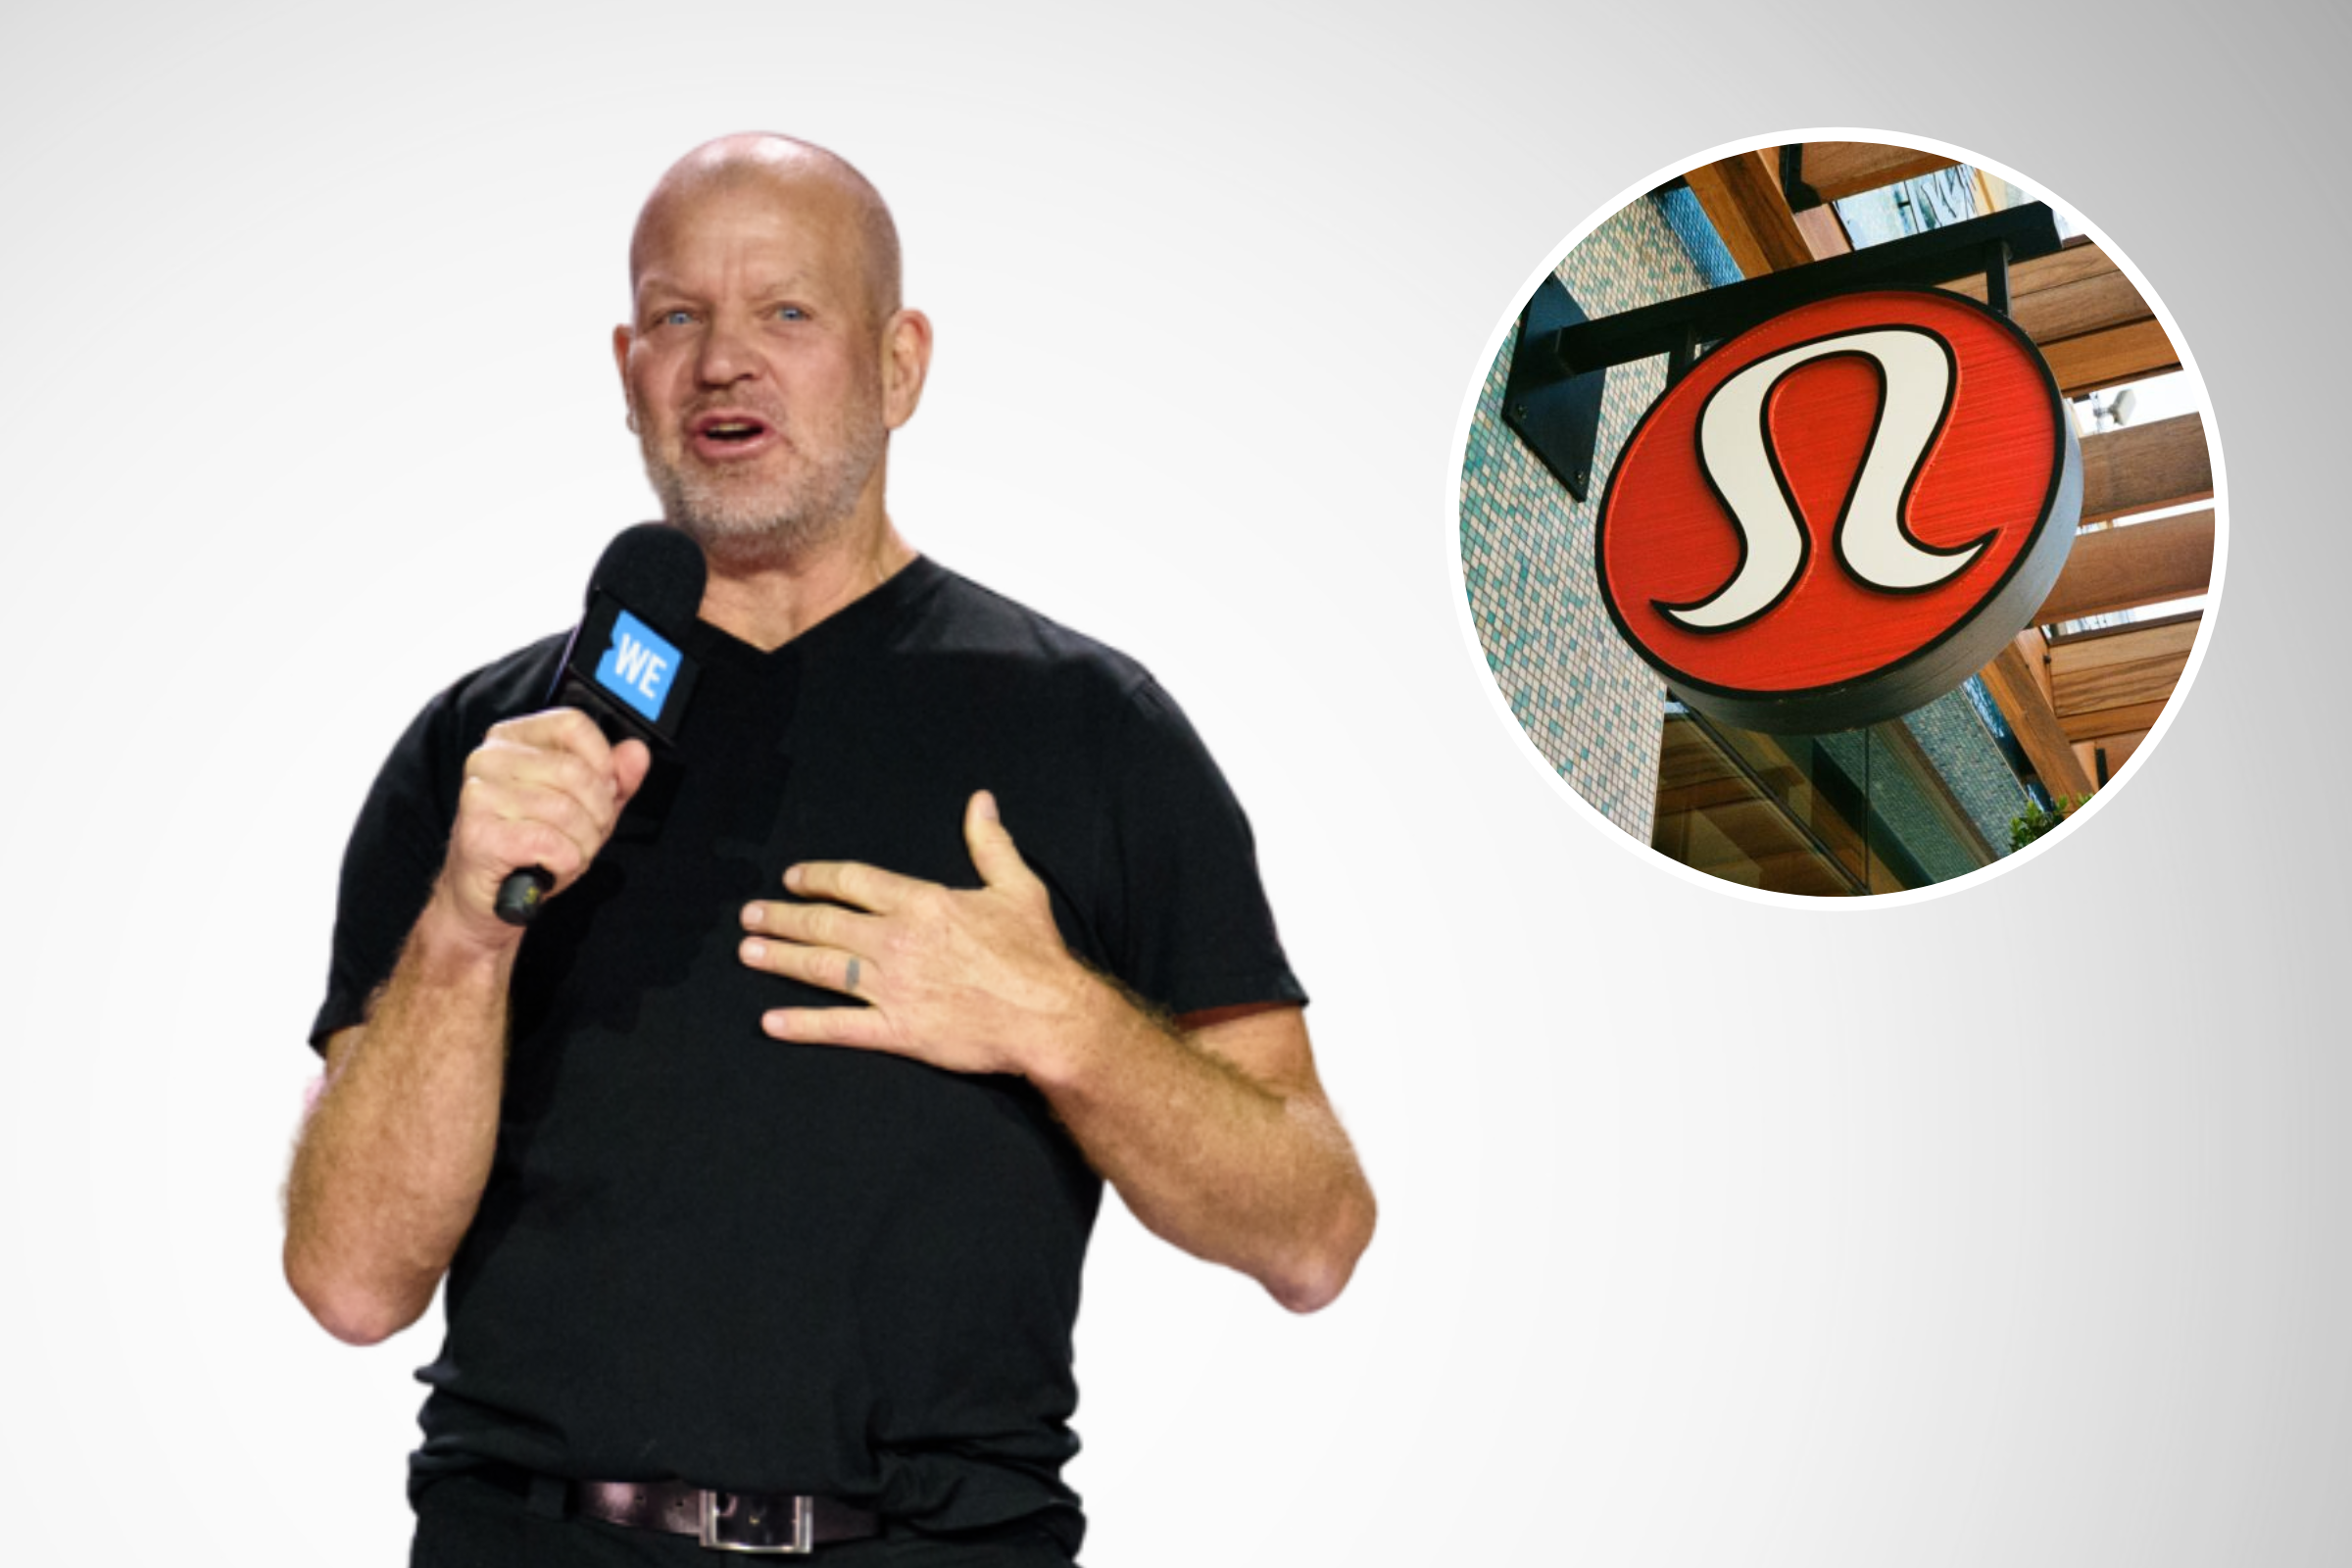 Lululemon founder's remarks have some DEI experts calling for boycotts to  combat 'regressive values